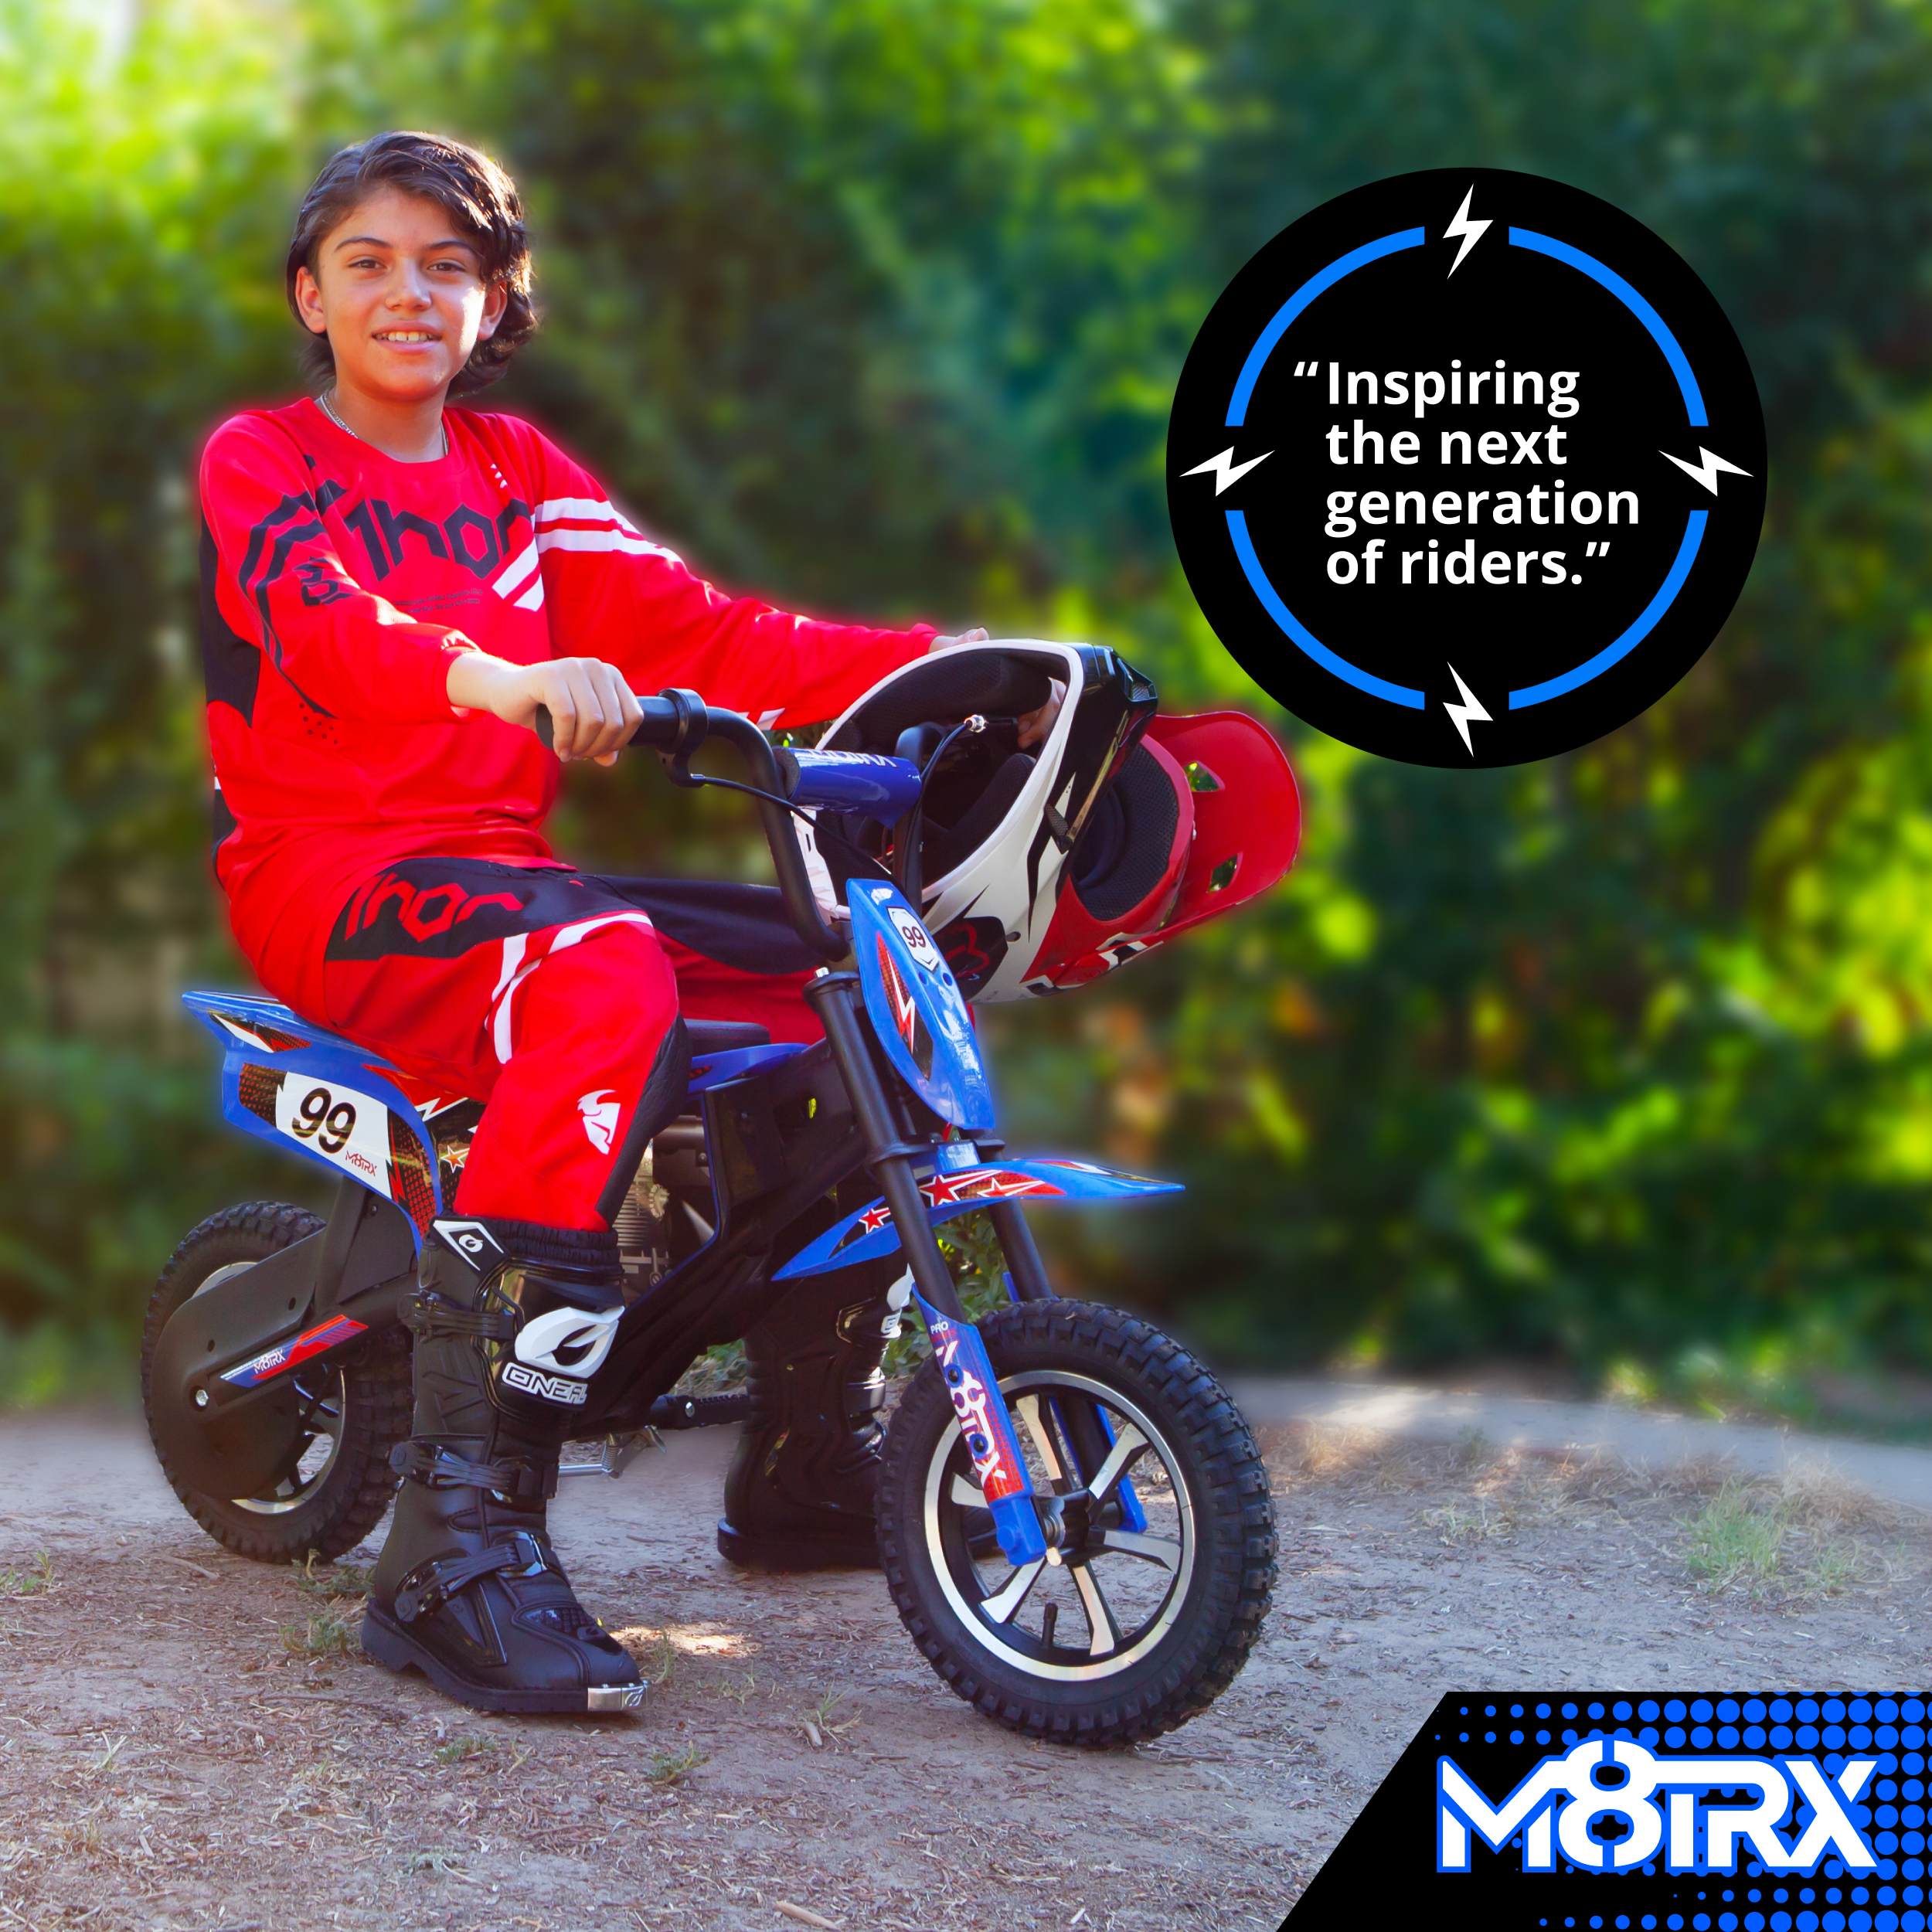 M8TRIX Blue 24V Electric Dirt Bike, Ride on Toy Motorcycle for Kids and Teens - image 3 of 8